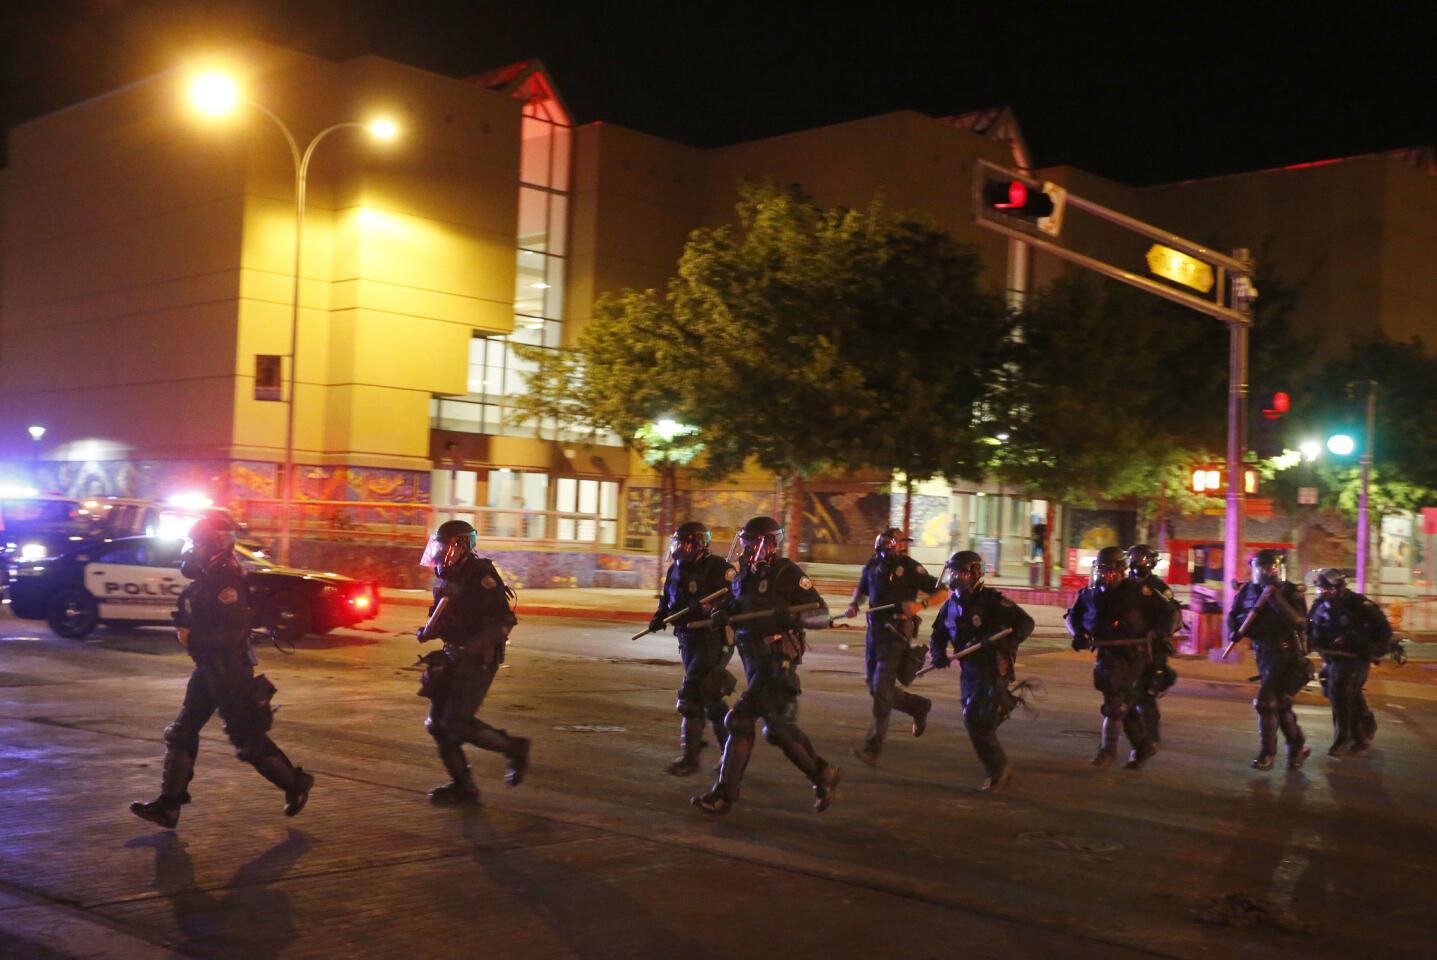 Riot police respond to anti-Trump protests following a rally and speech by Republican presidential candidate Donald Trump, in front of the Albuquerque Convention Center where the event was held, in Albuquerque, N.M., Tuesday, May 24, 2016.